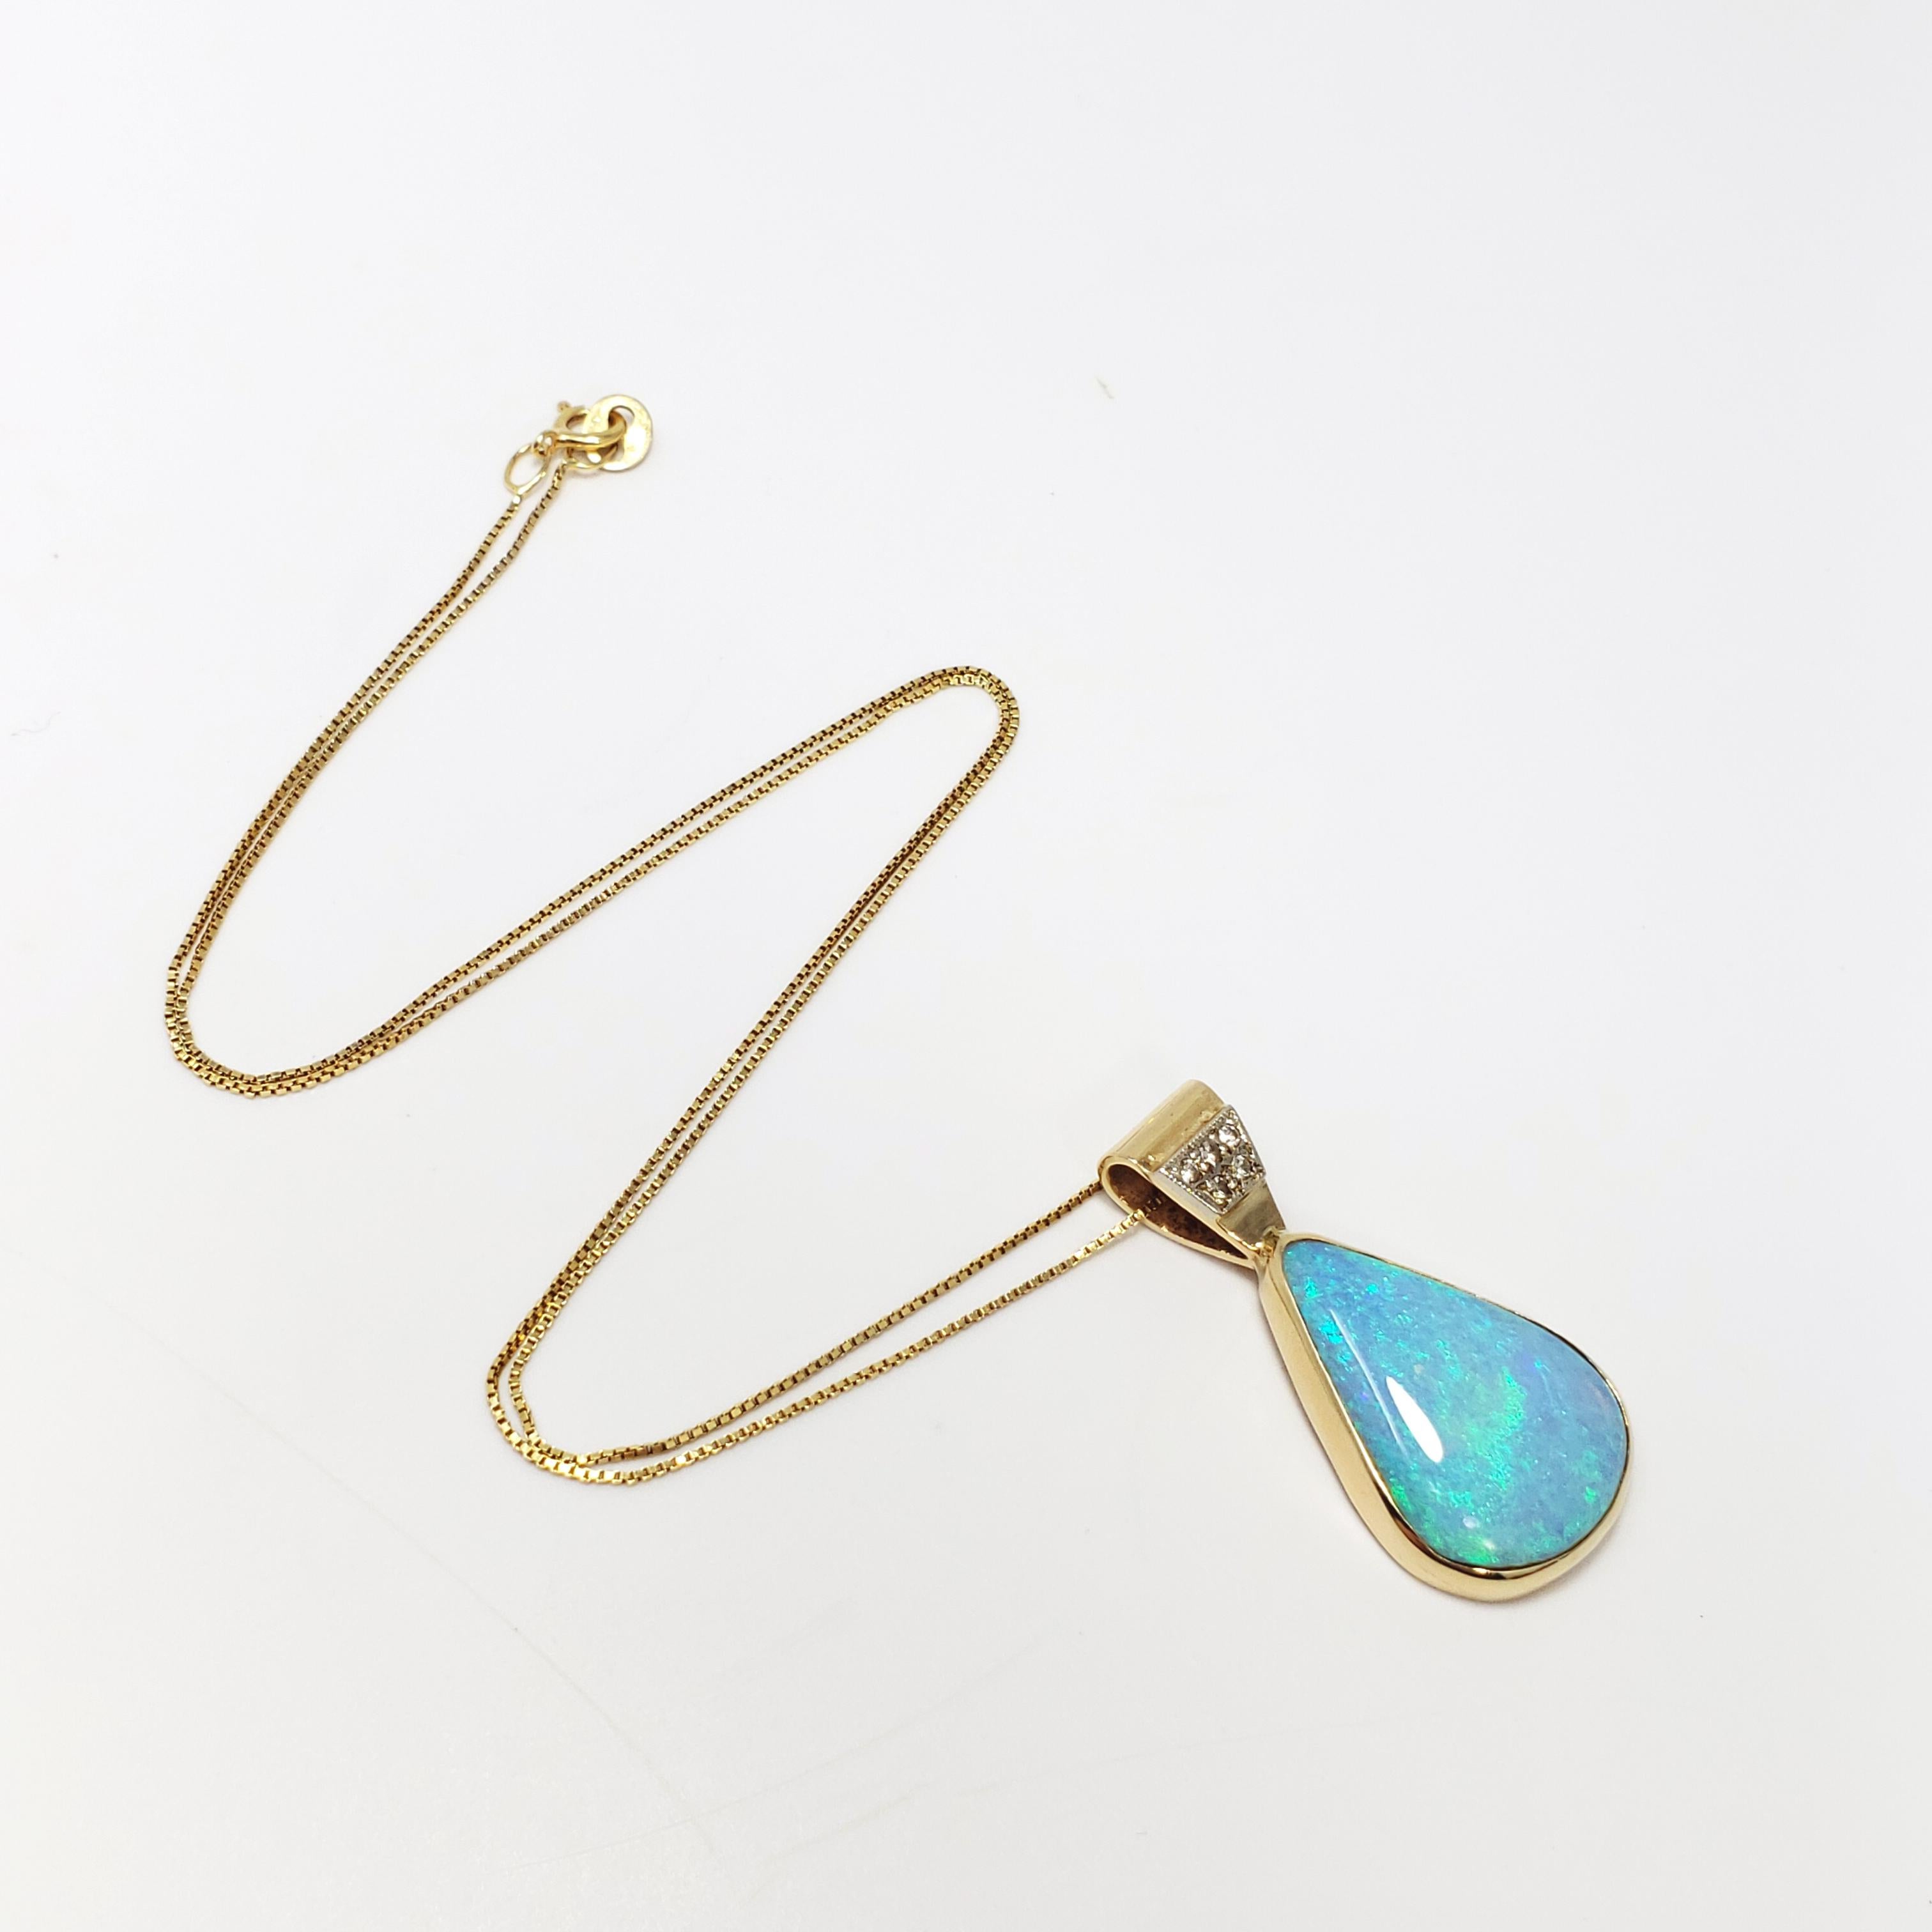 This gorgeous pendant features a natural tear-drop shaped opal in glowing blue and teal colors, set in a 14KT gold bezel, accented with 6 diamonds set in platinum. Hangs off a fine Italian 14KT gold chain. An excellent touch to any casual or formal